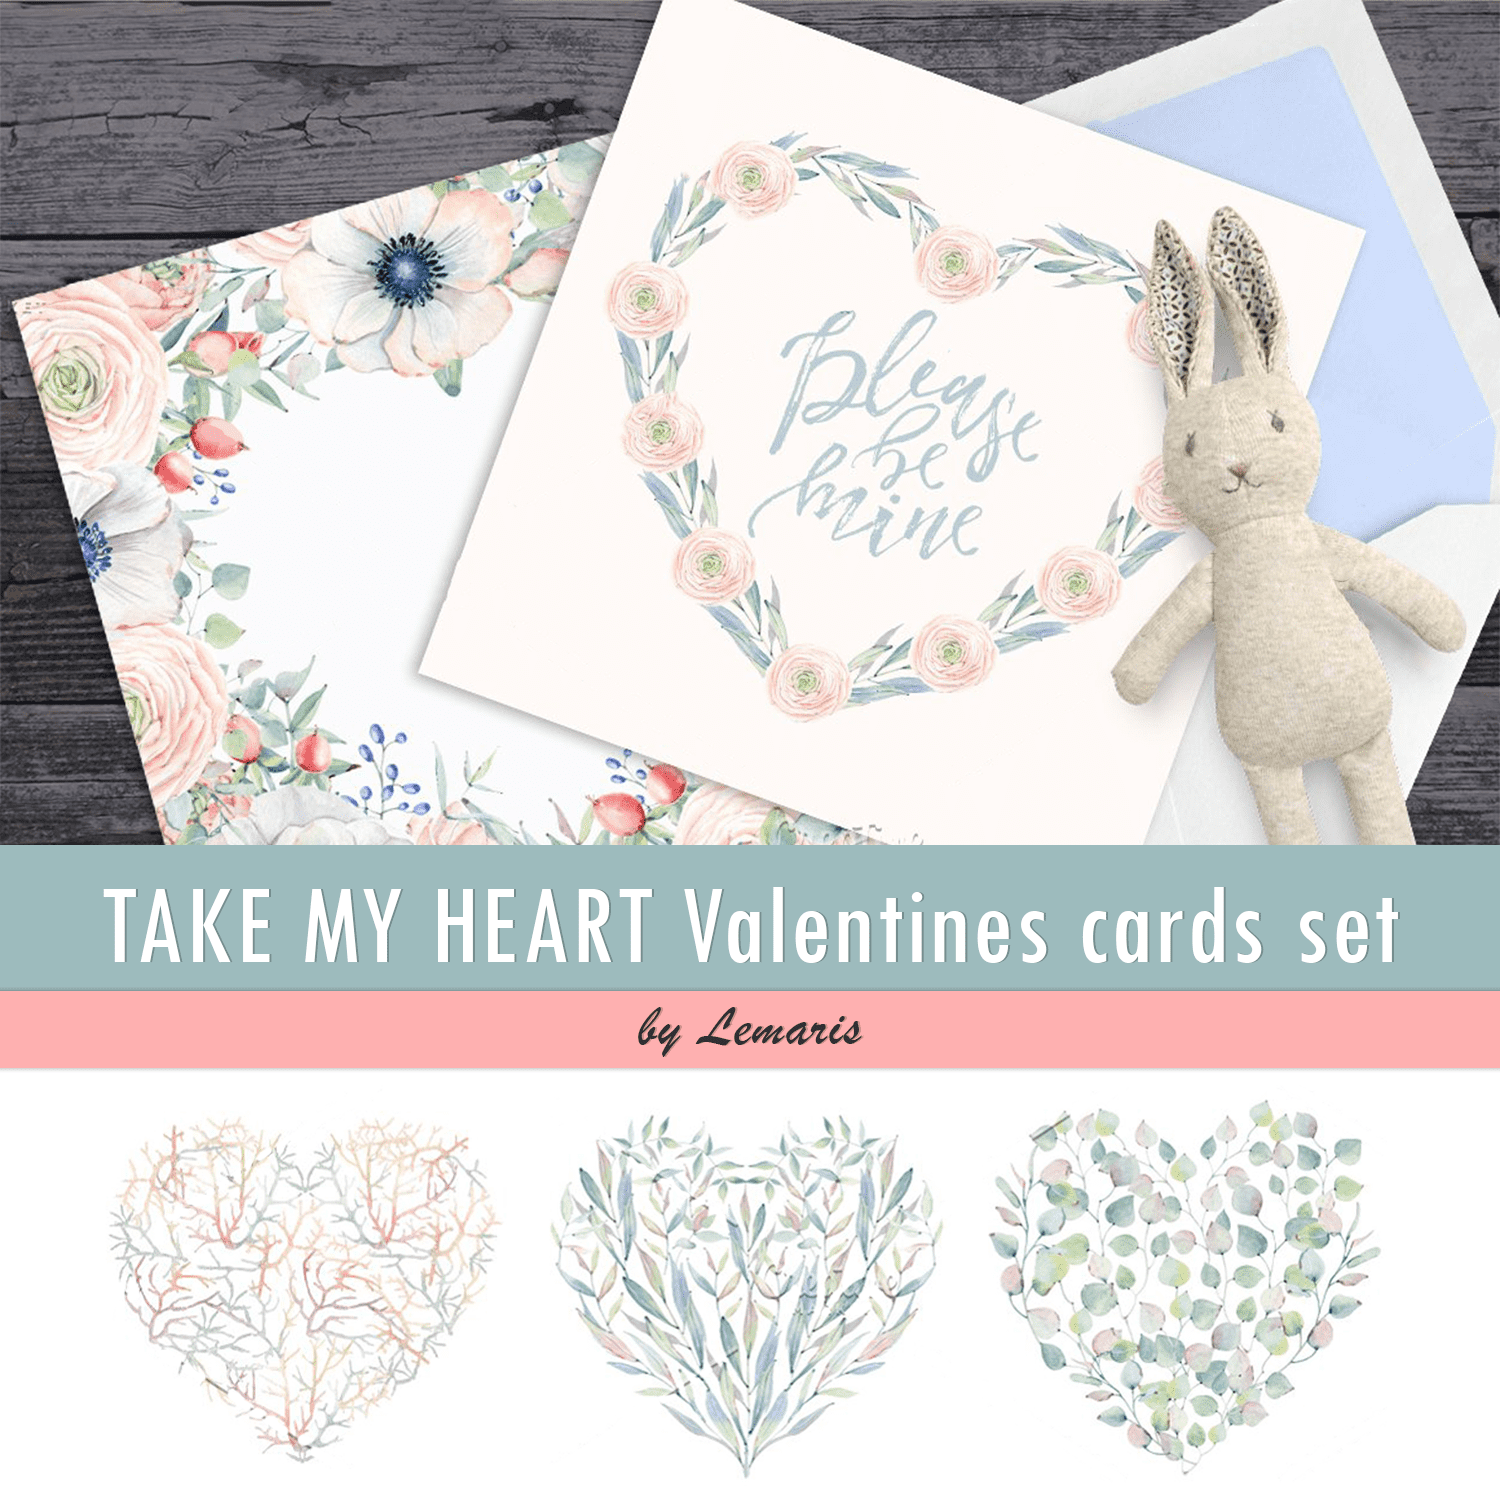 TAKE MY HEART Valentines cards set cover.